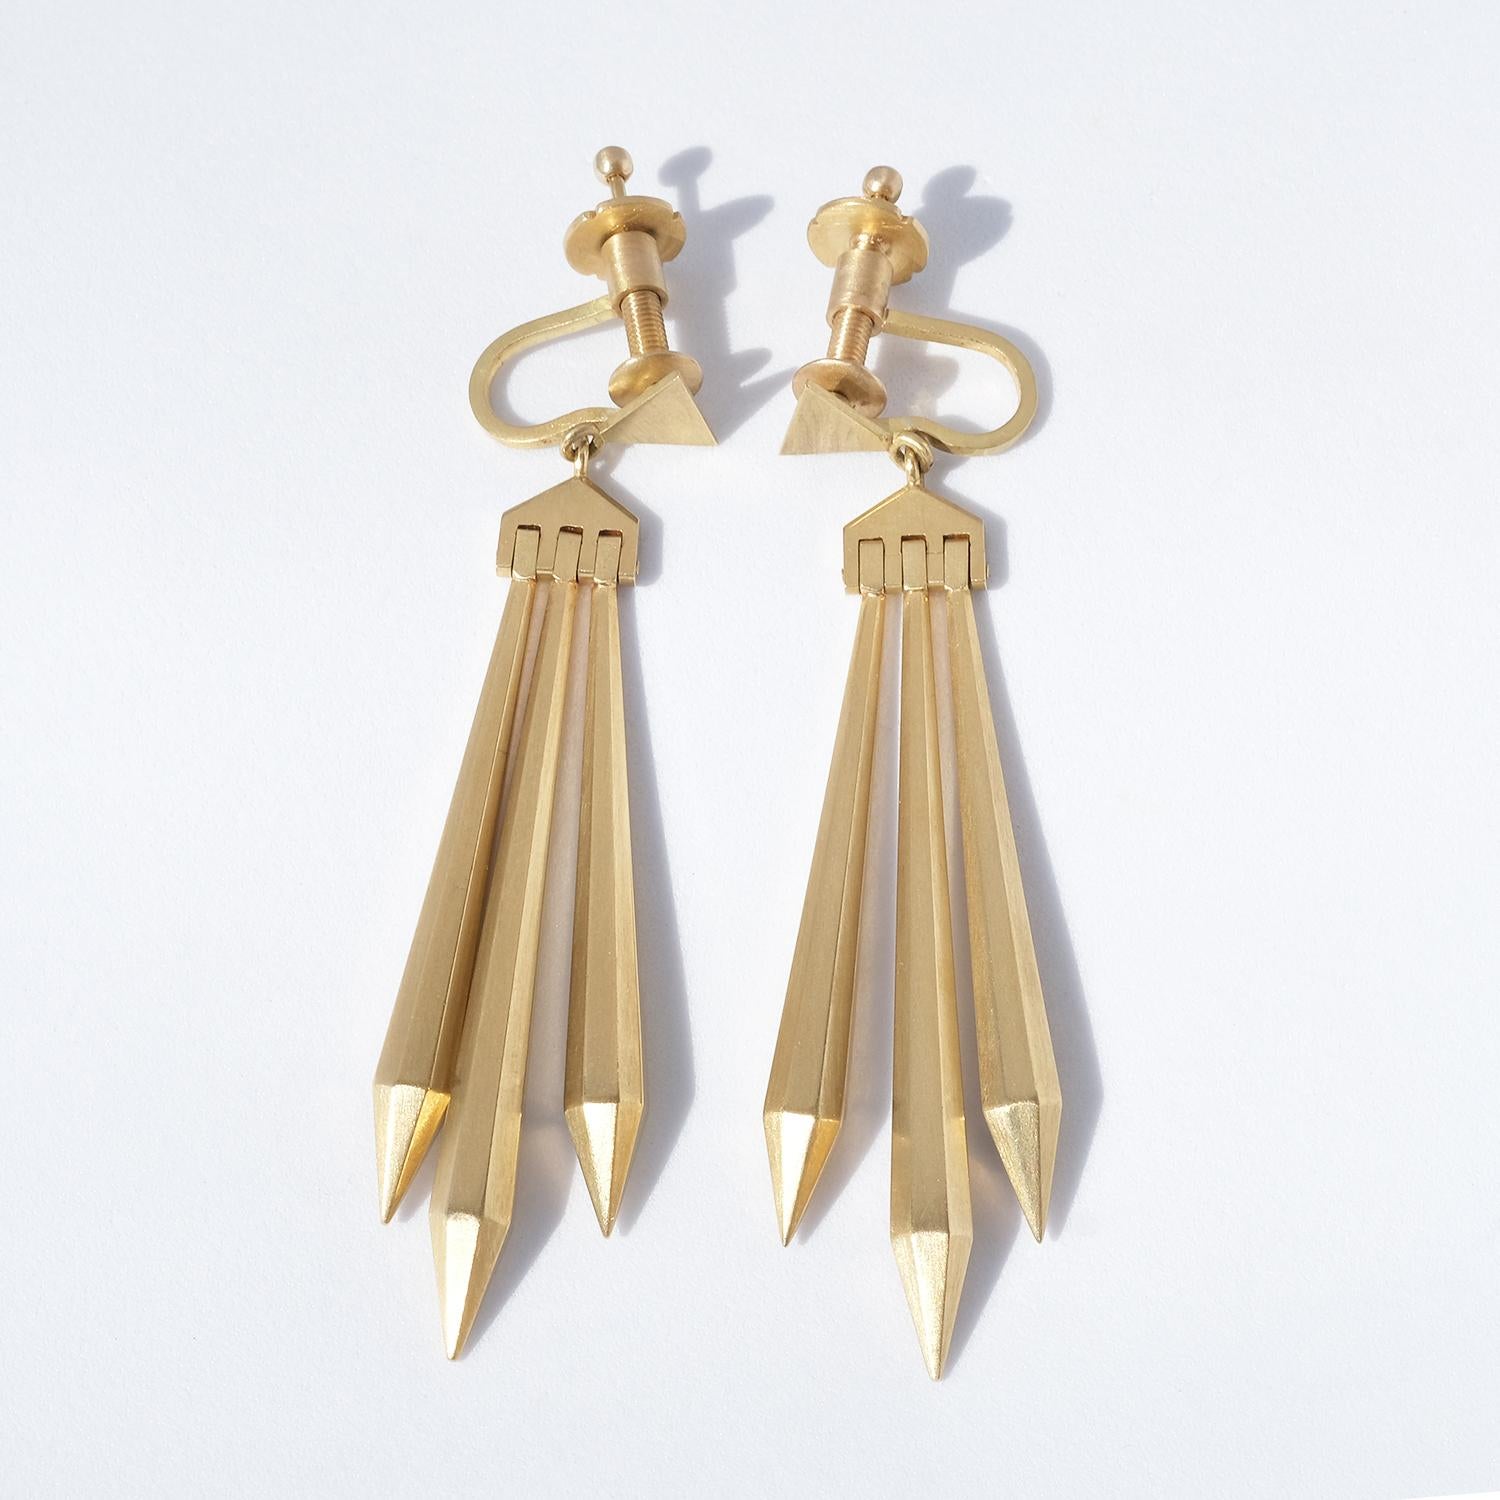 Pair of Swedish Earrings Made by Wien Nilsson in 1961 For Sale 4